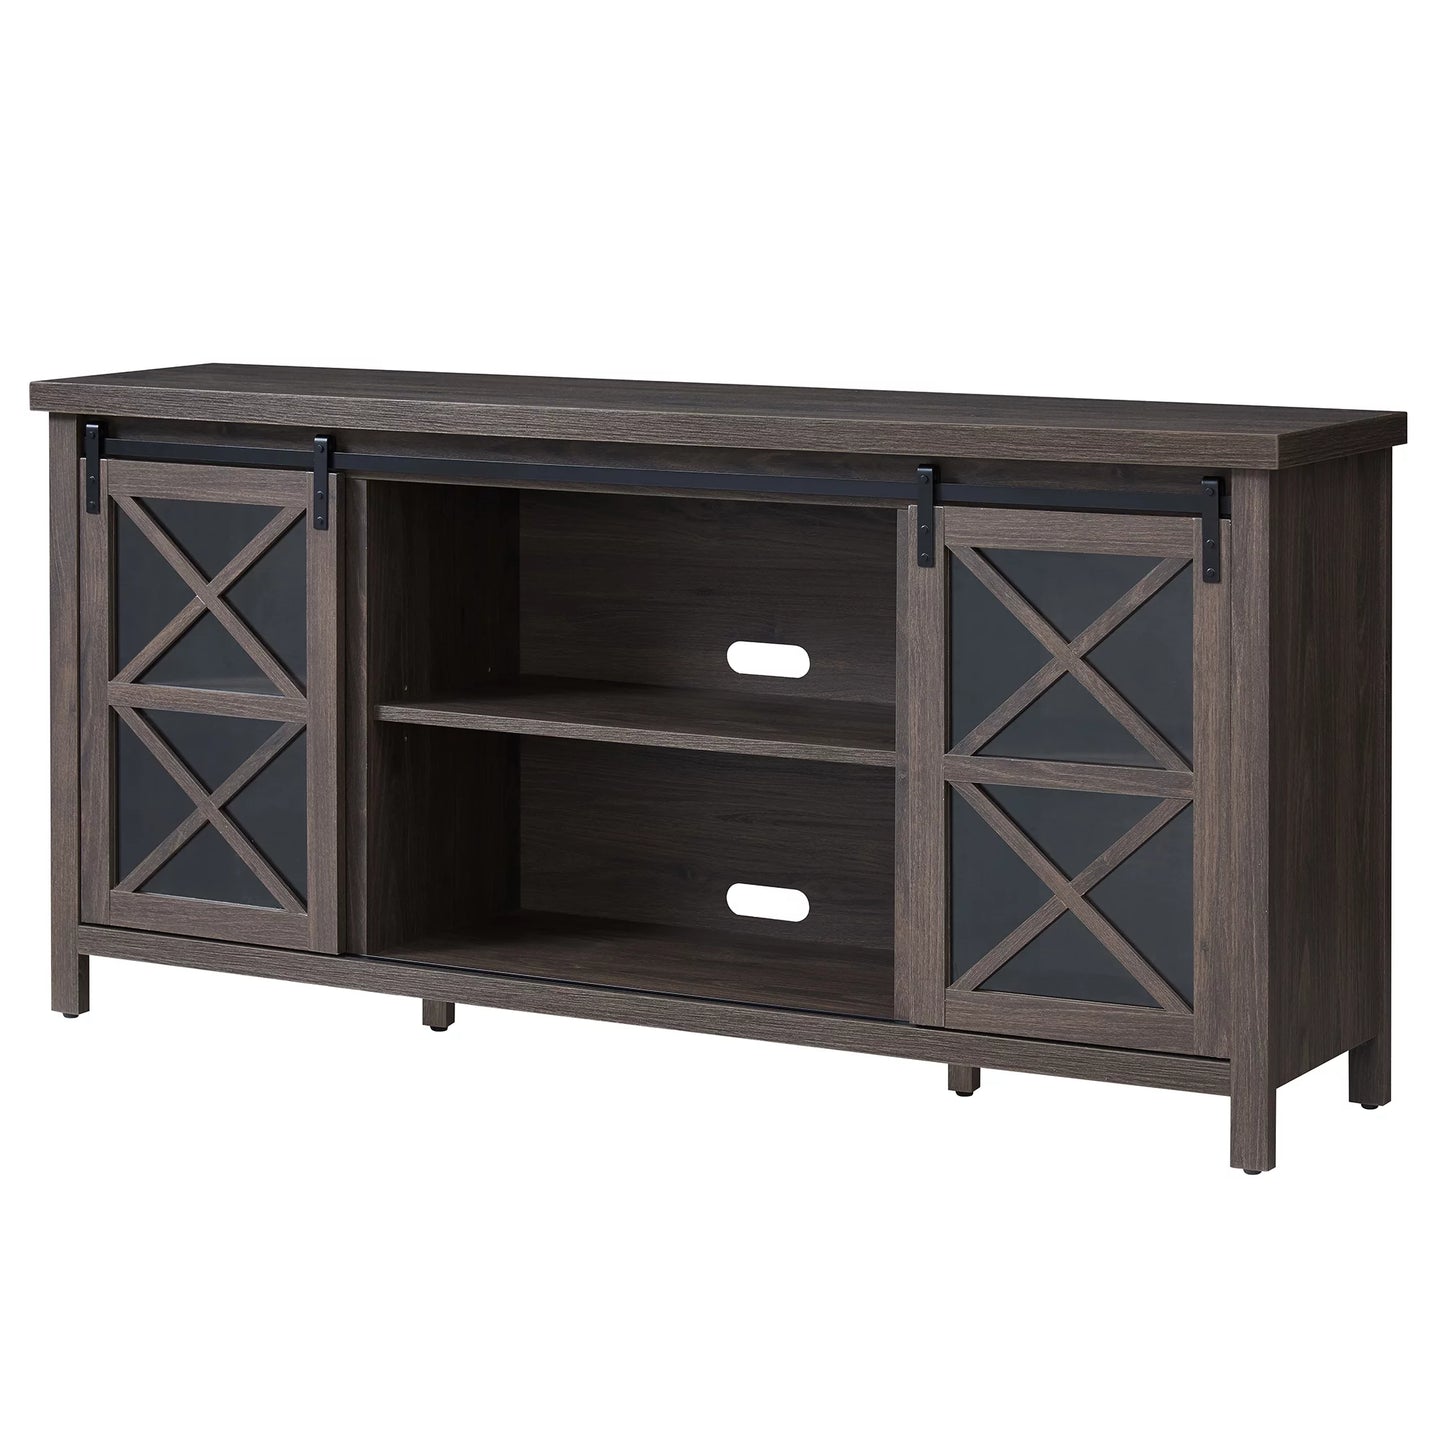 Addison&Lane Clementine TV Stand for TVs up to 80", Antiqued Gray Oak